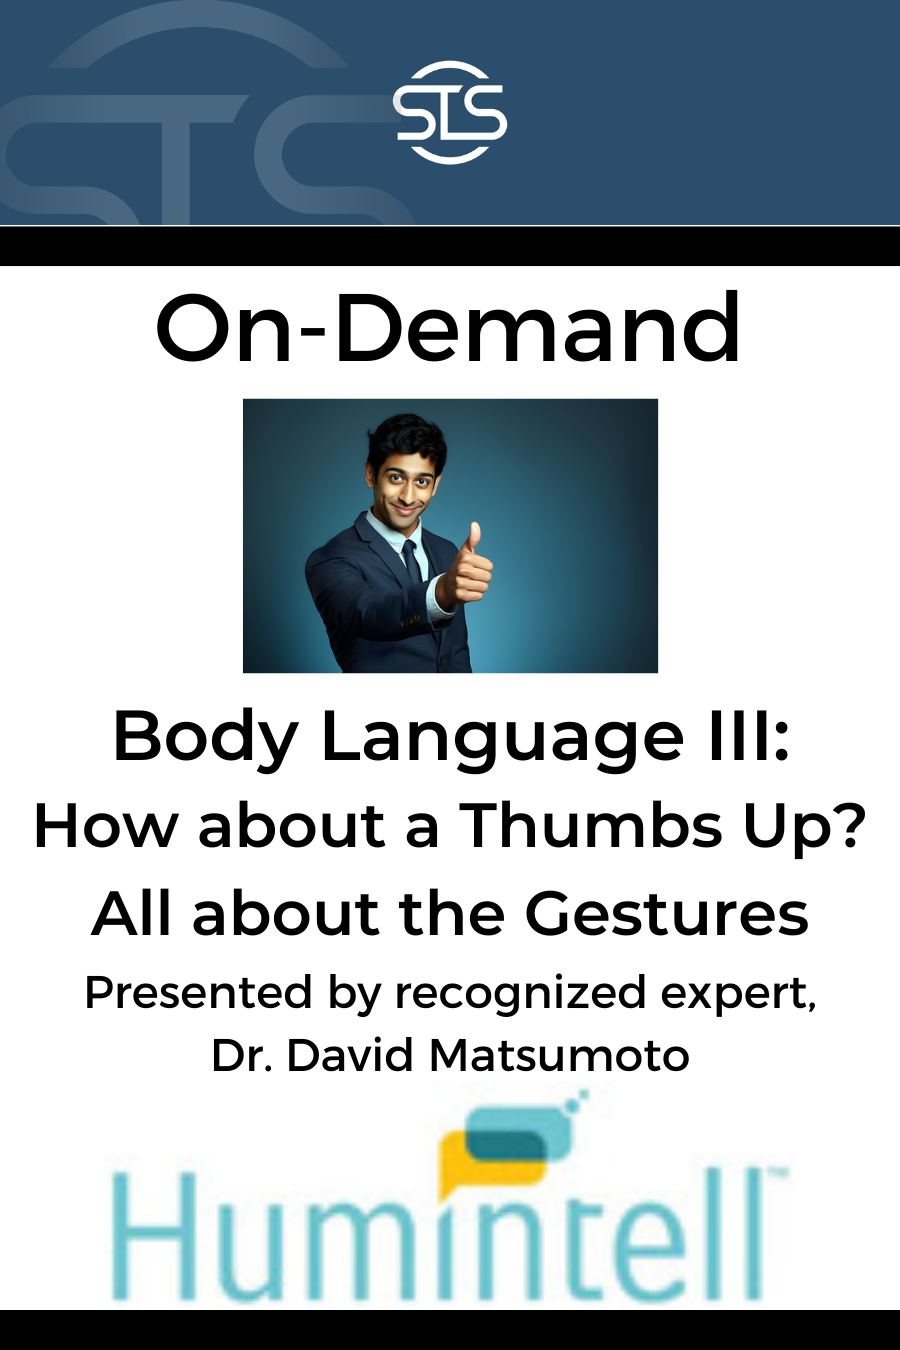 Body Language III: How about a Thumbs Up? All about the Gestures